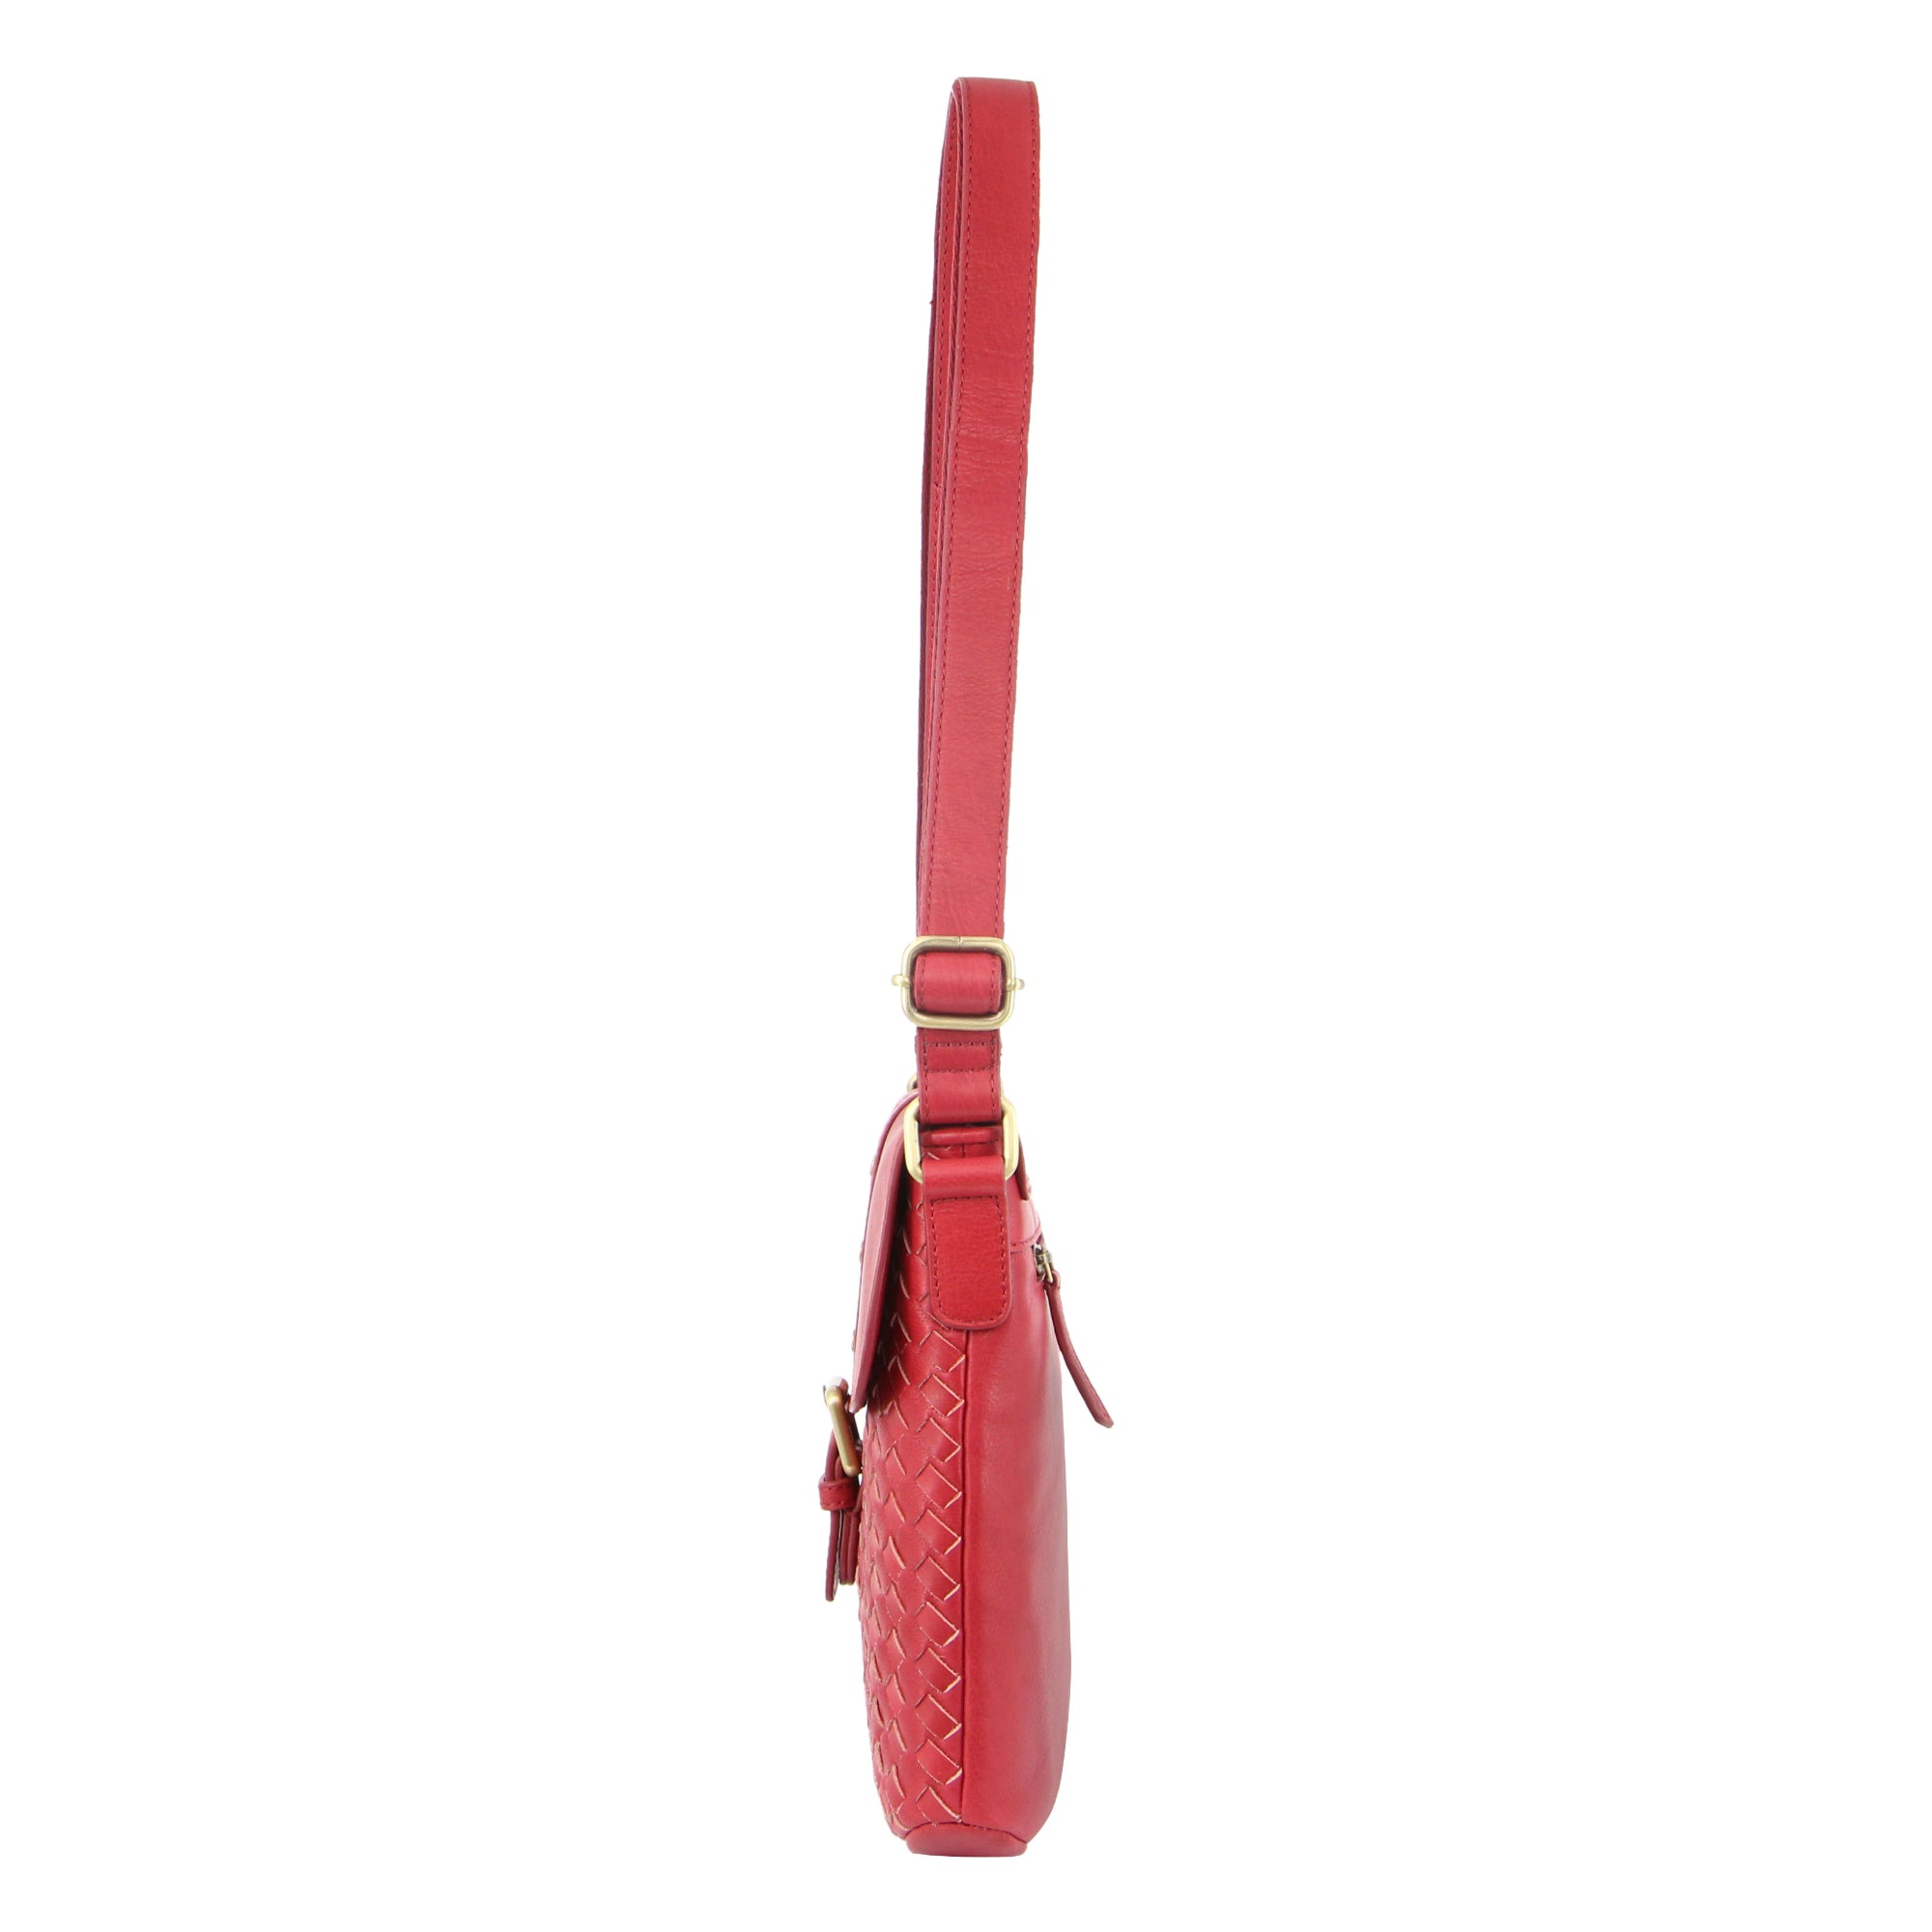 Pierre Cardin Woven Leather Ladies Cross-Body Bag with Flap in Red